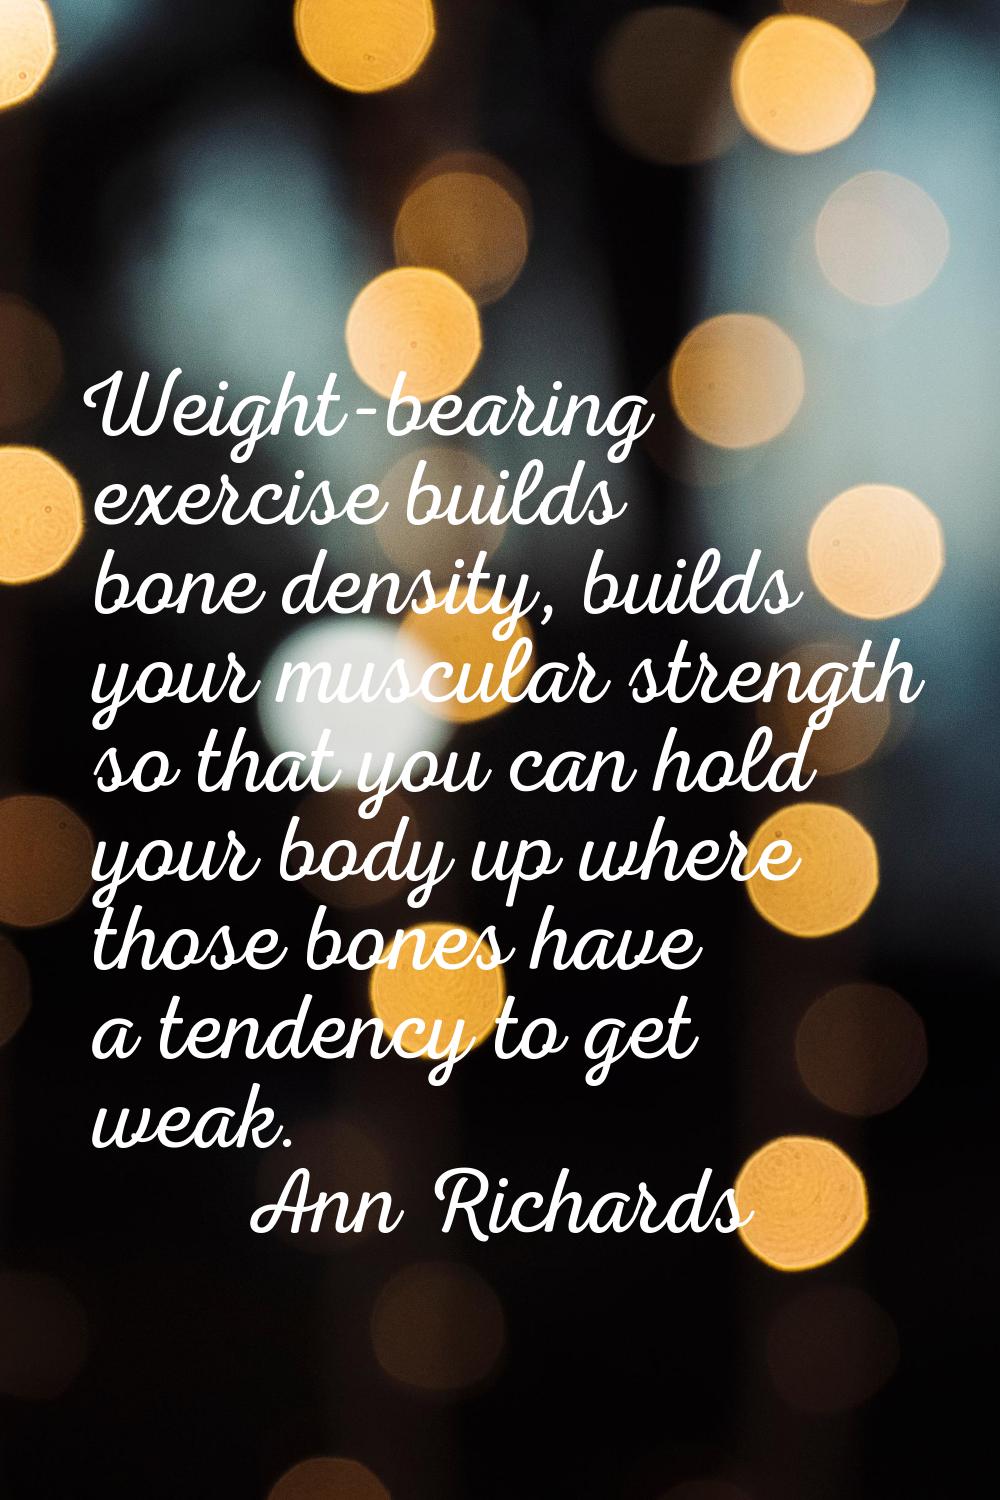 Weight-bearing exercise builds bone density, builds your muscular strength so that you can hold you